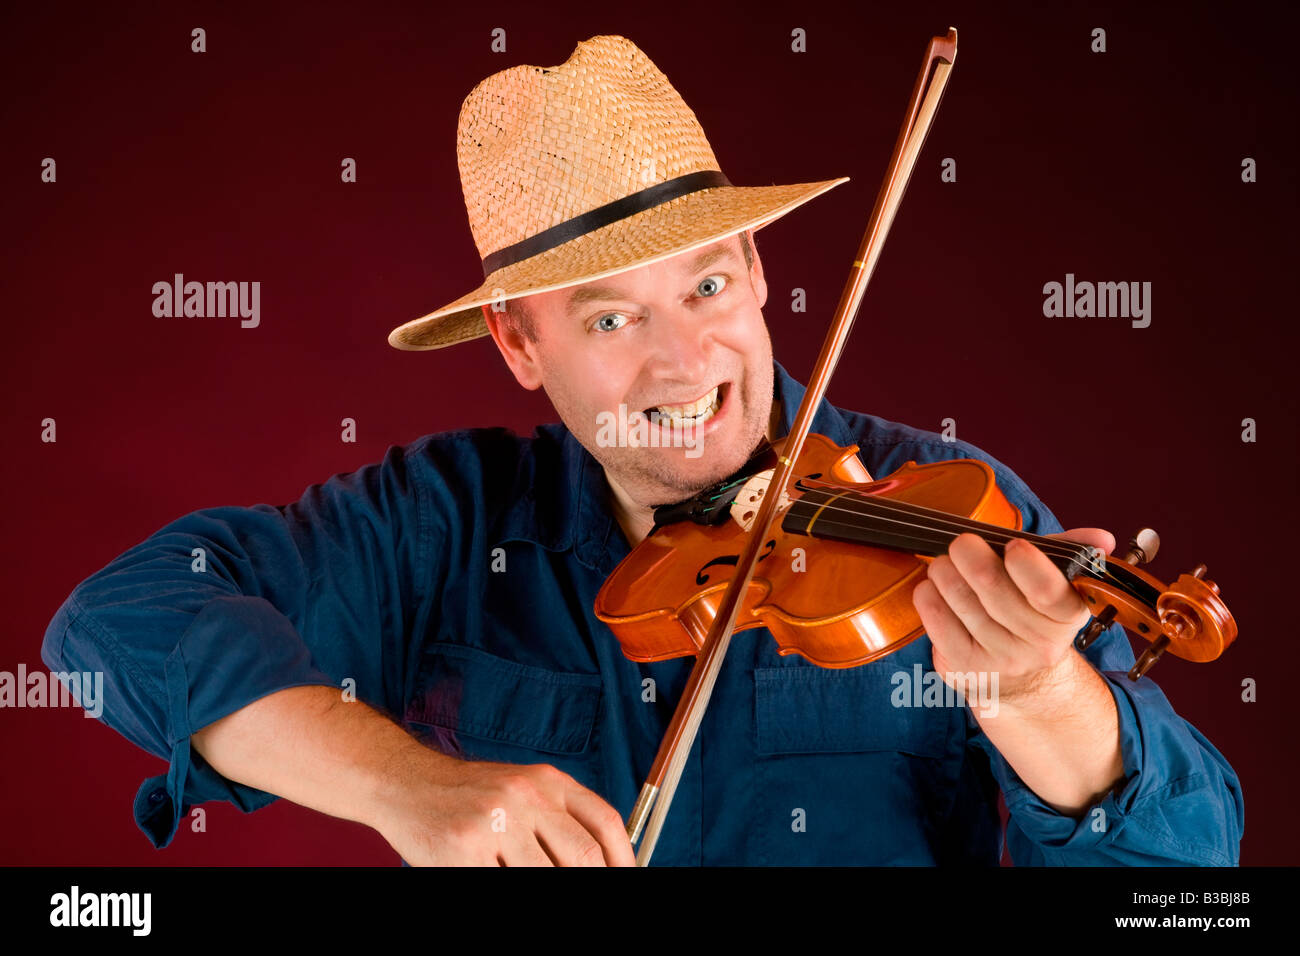 A man is playing country music on the fiddle Stock Photo